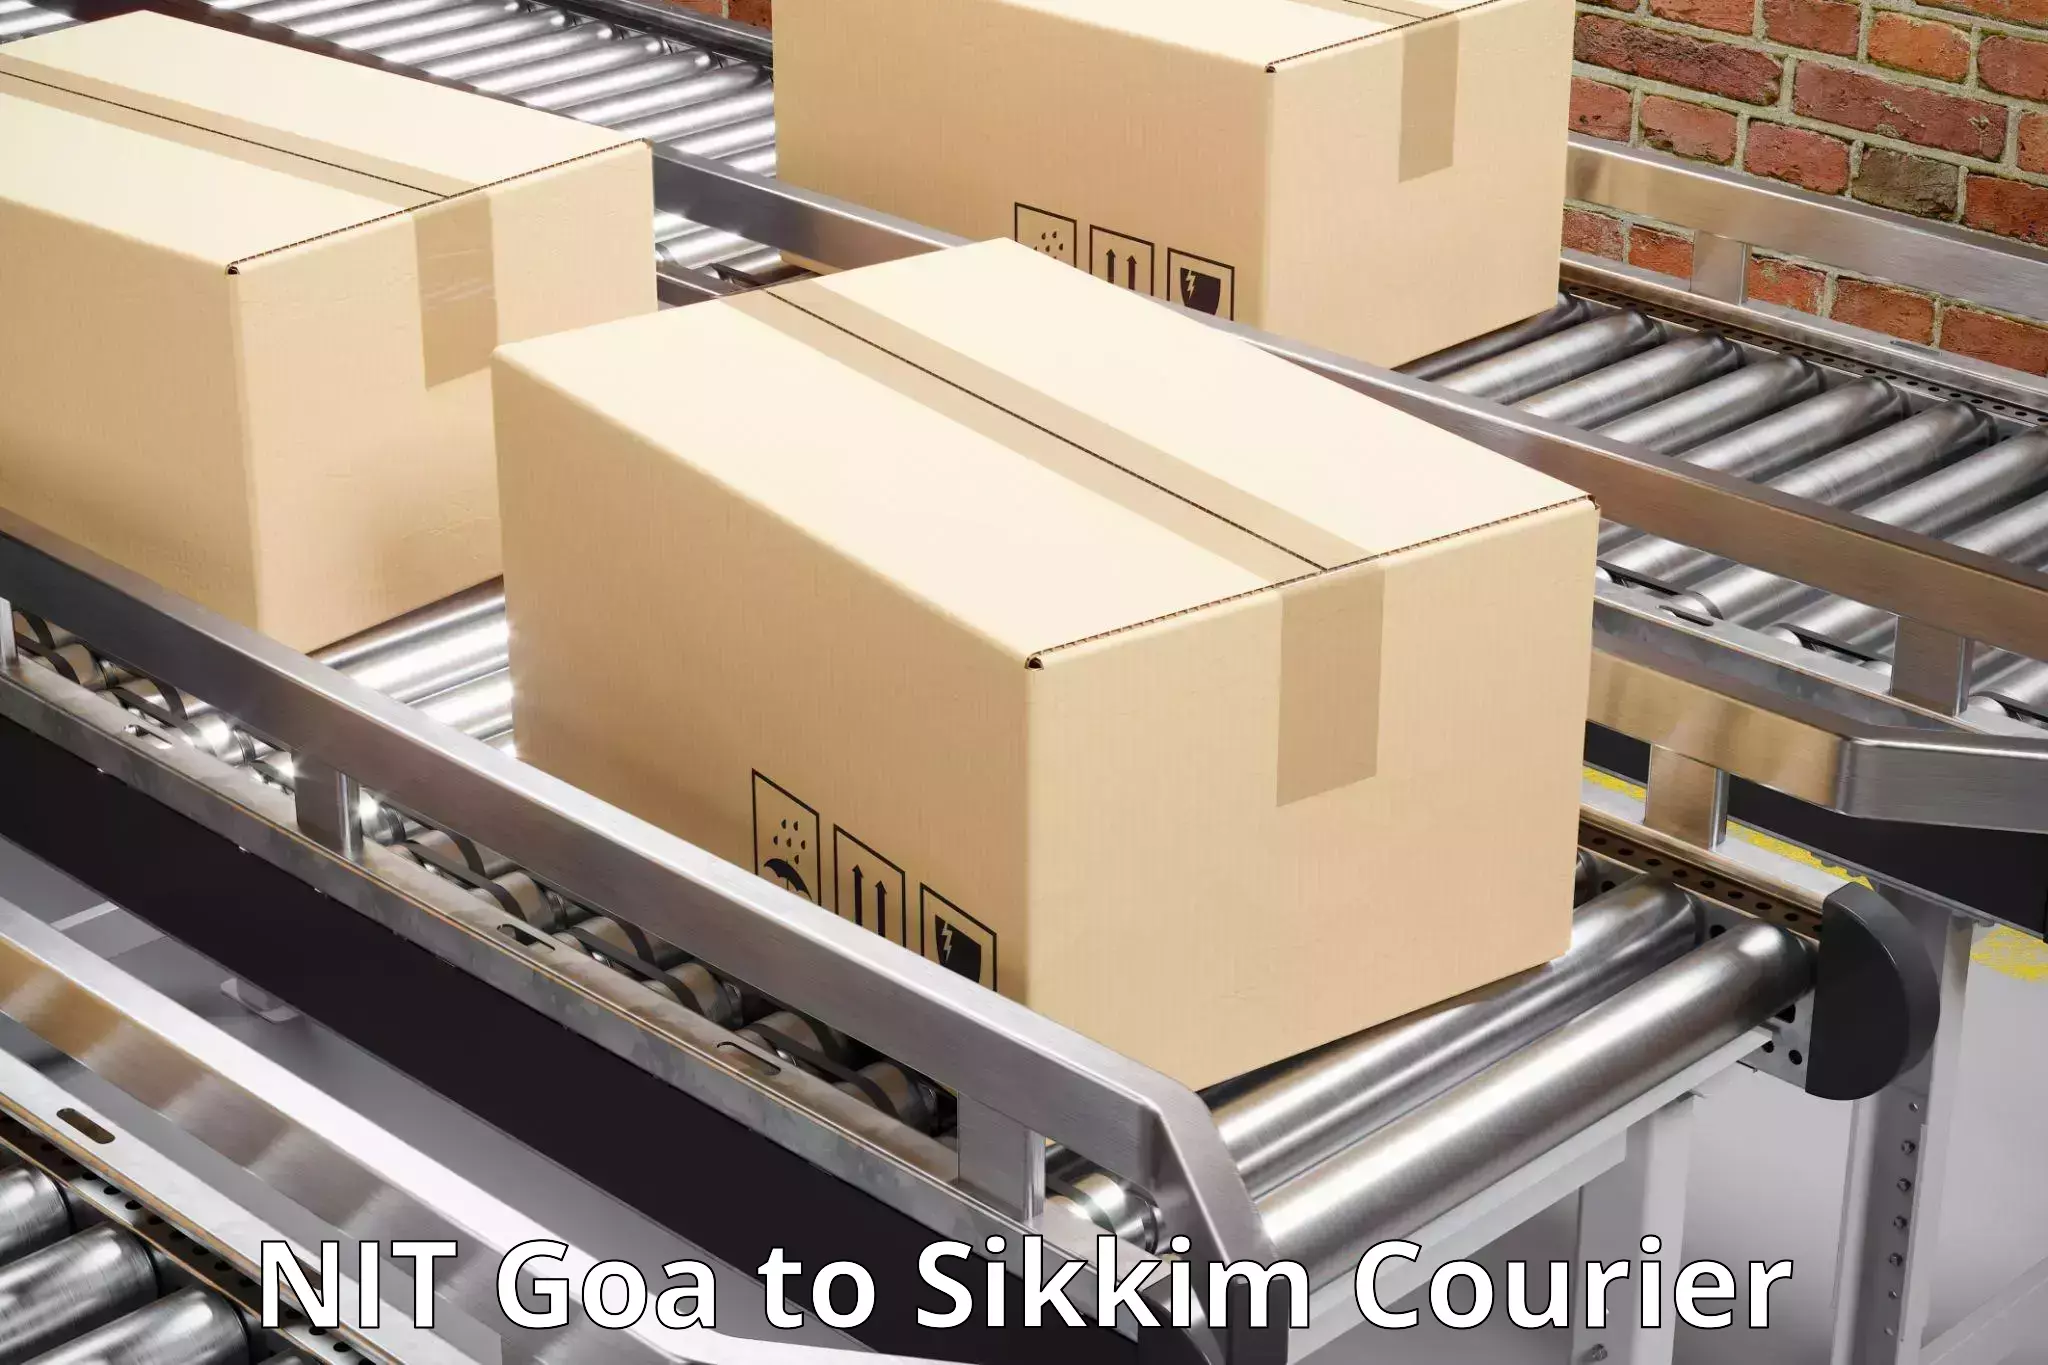 24/7 courier service NIT Goa to Sikkim